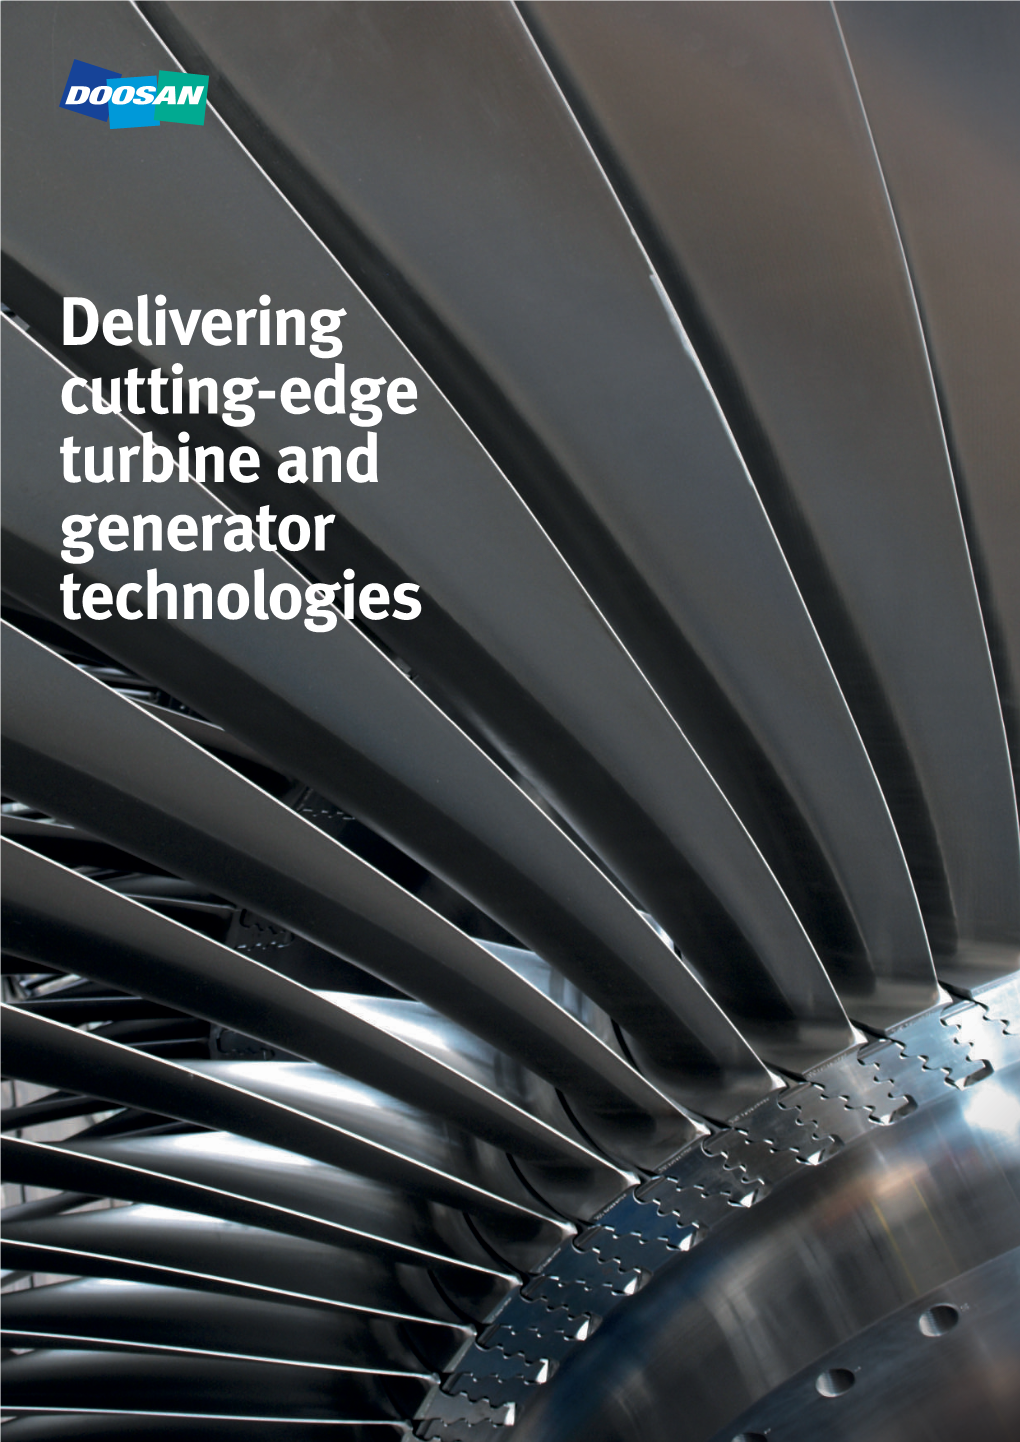 Delivering Cutting-Edge Turbine and Generator Technologies 2 Doosan Delivering Cutting-Edge Turbine and Generator Technologies 3